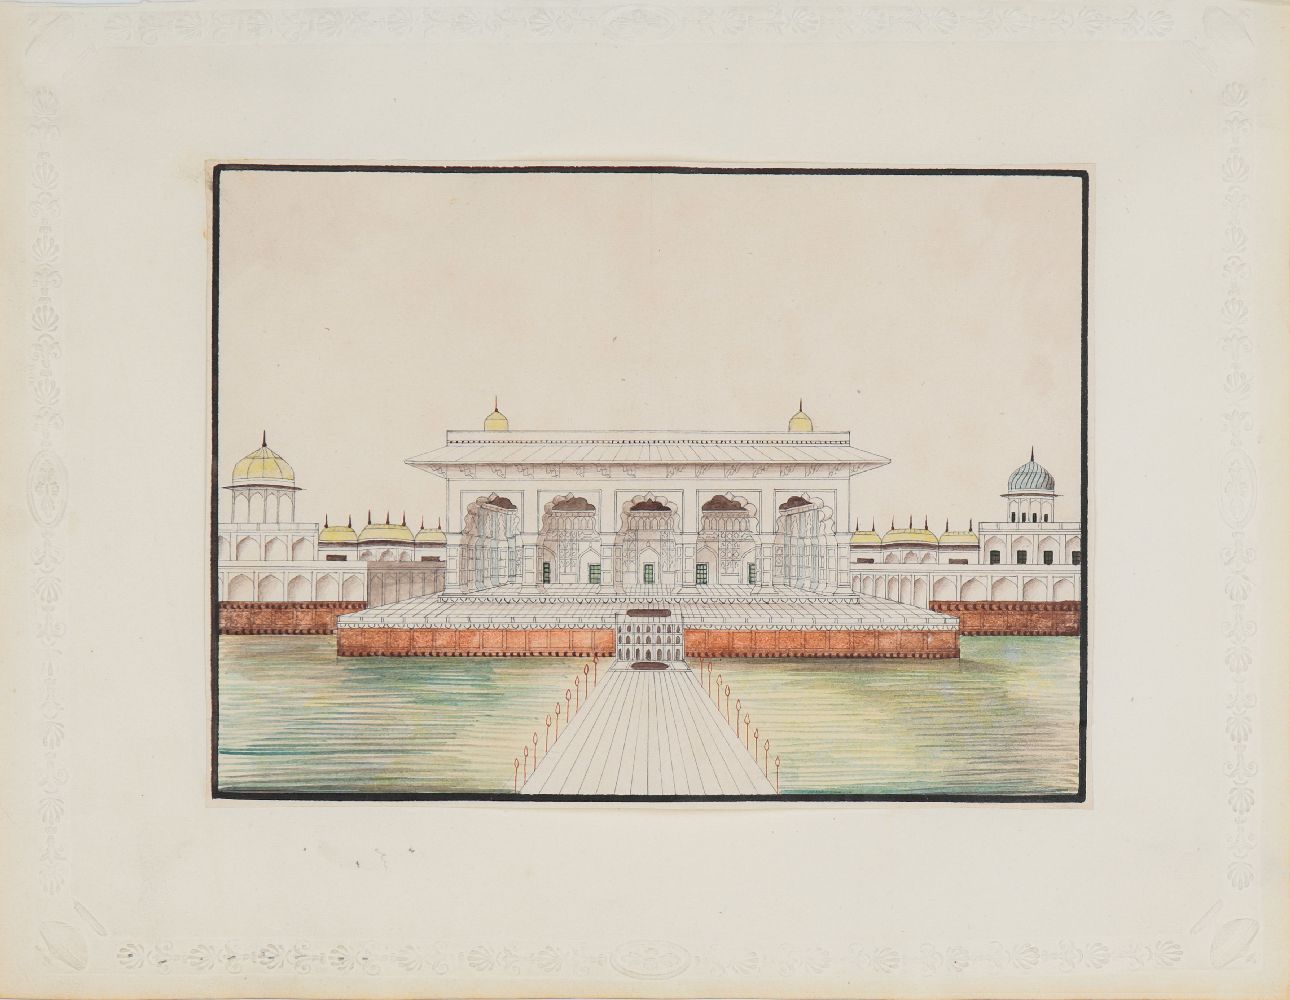 Amendment: Please note this is a view of the Khas Mahal, Agra Fort and not the Tomb of Akbar